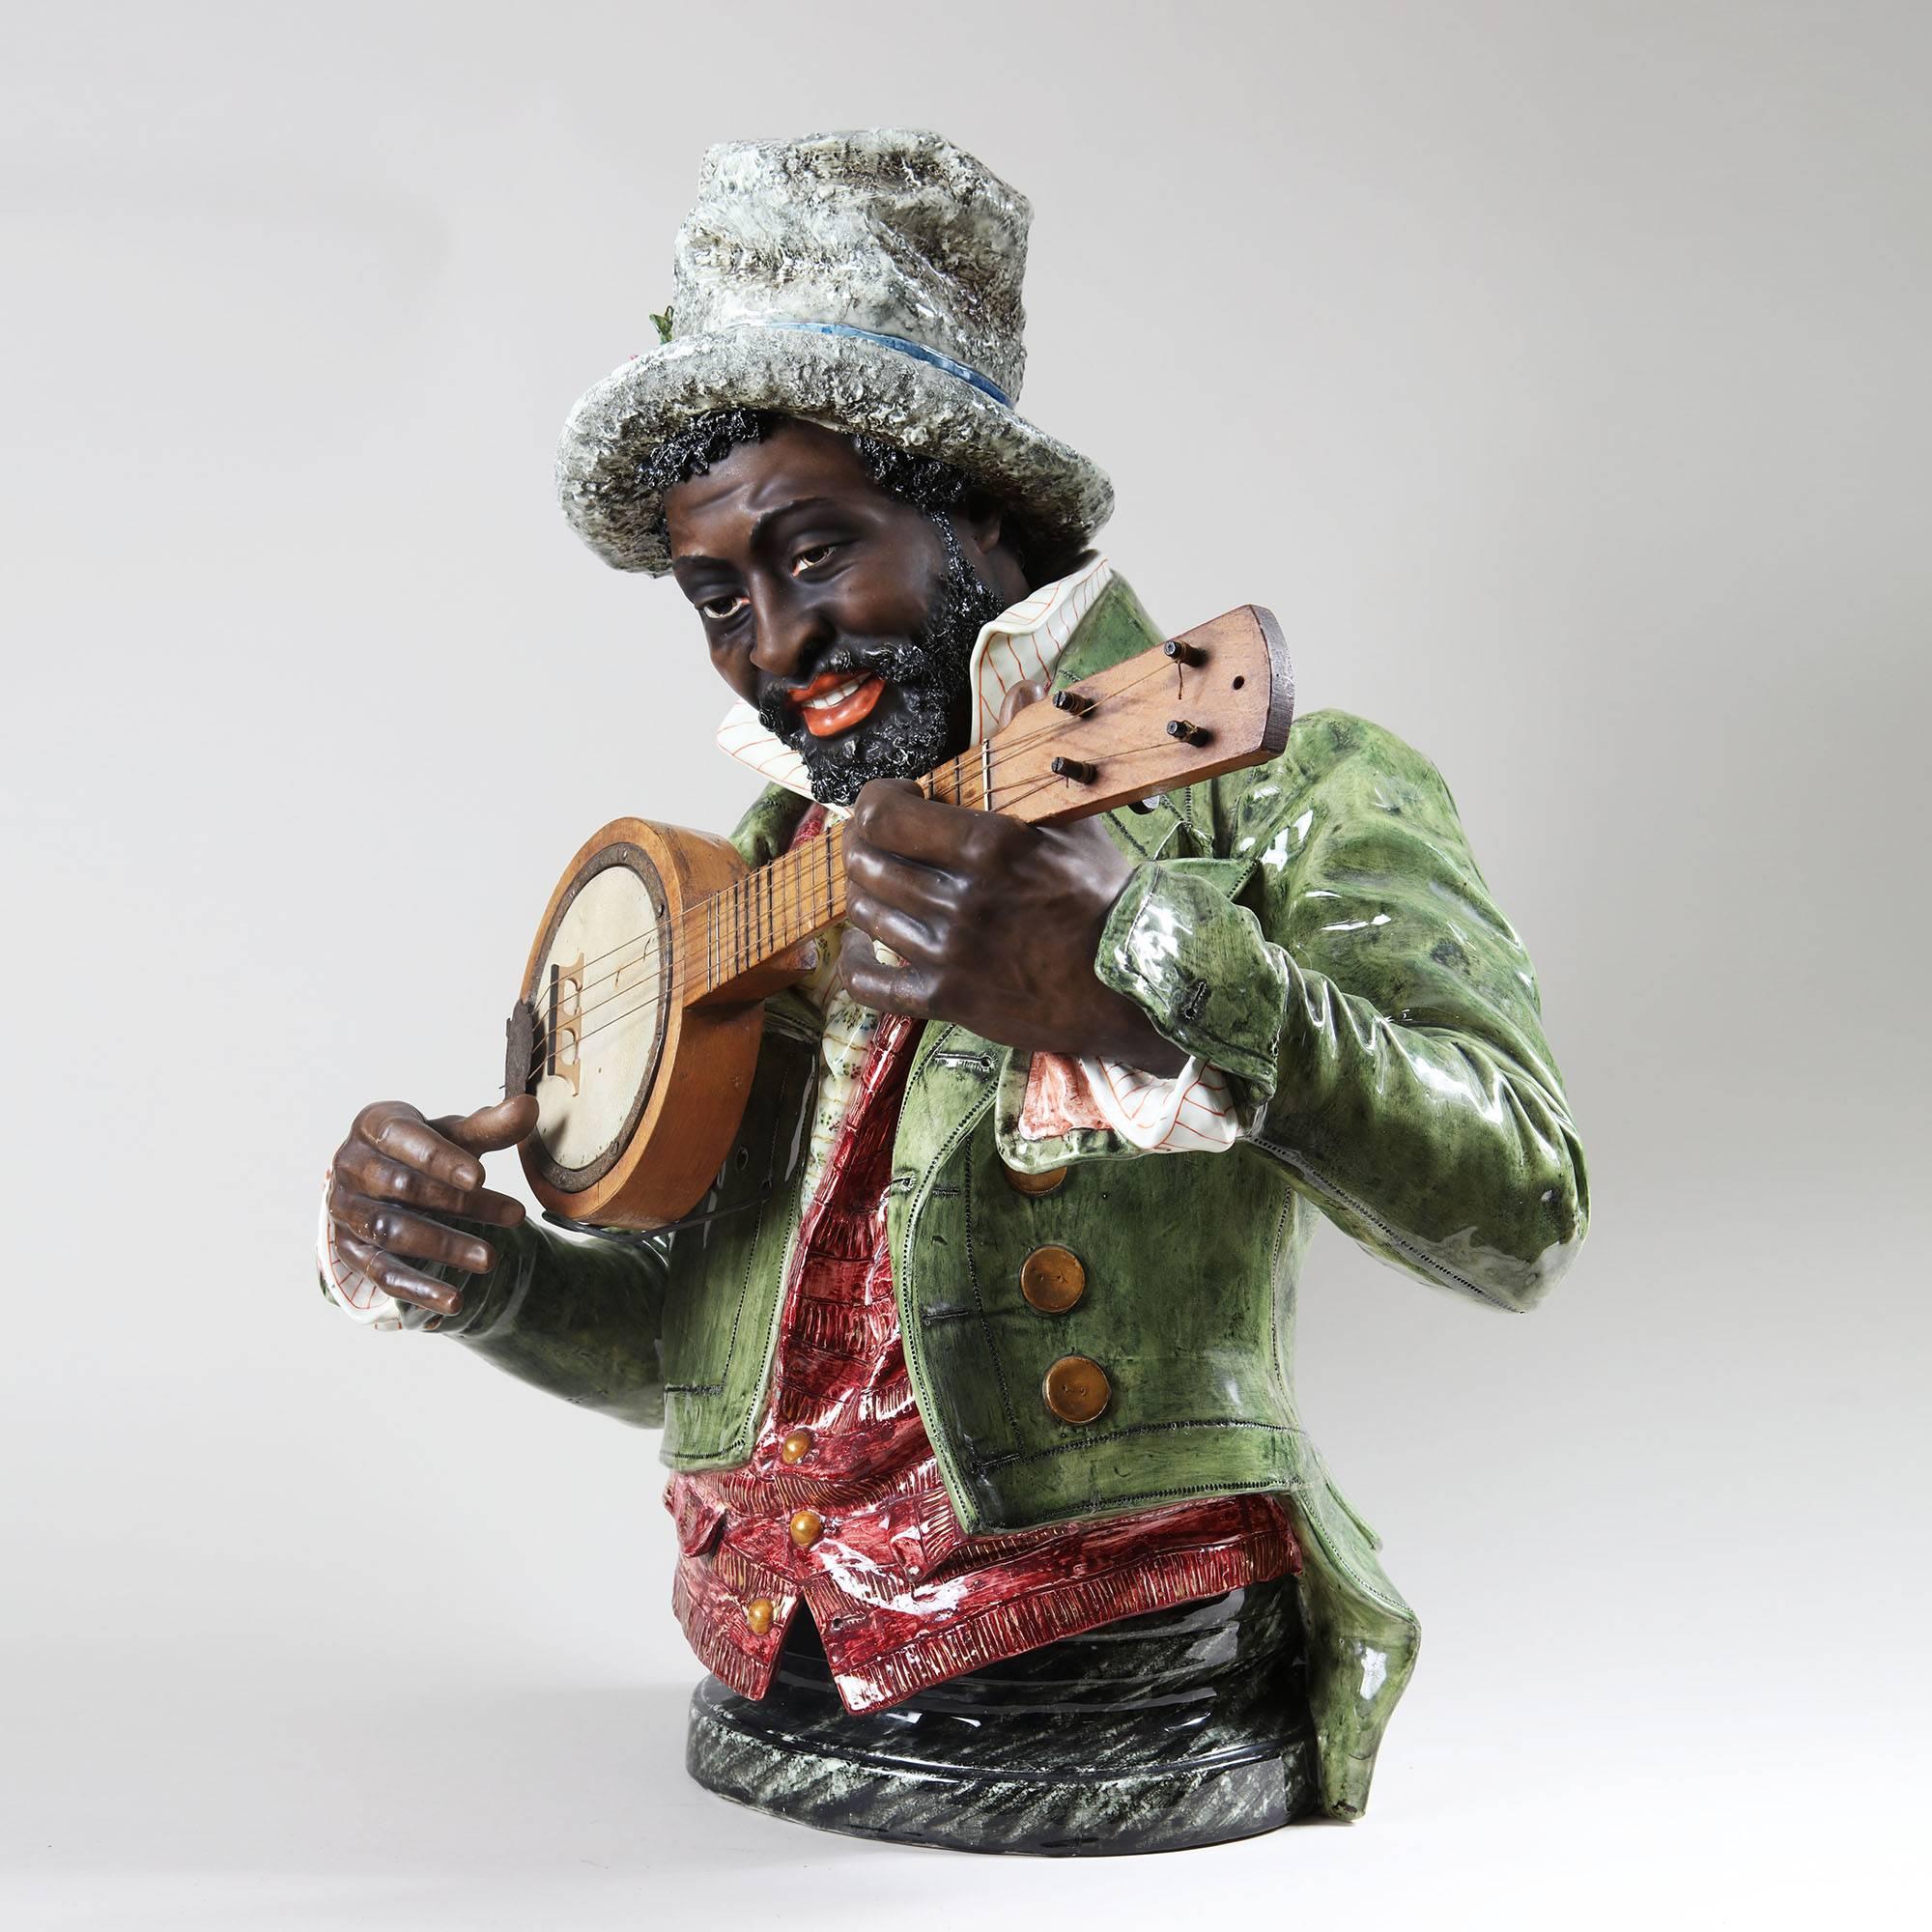 A Musical themed Majolica Man Playing the Banjo / Mandolin
Measures:
74 cm high, 
60 cm wide.